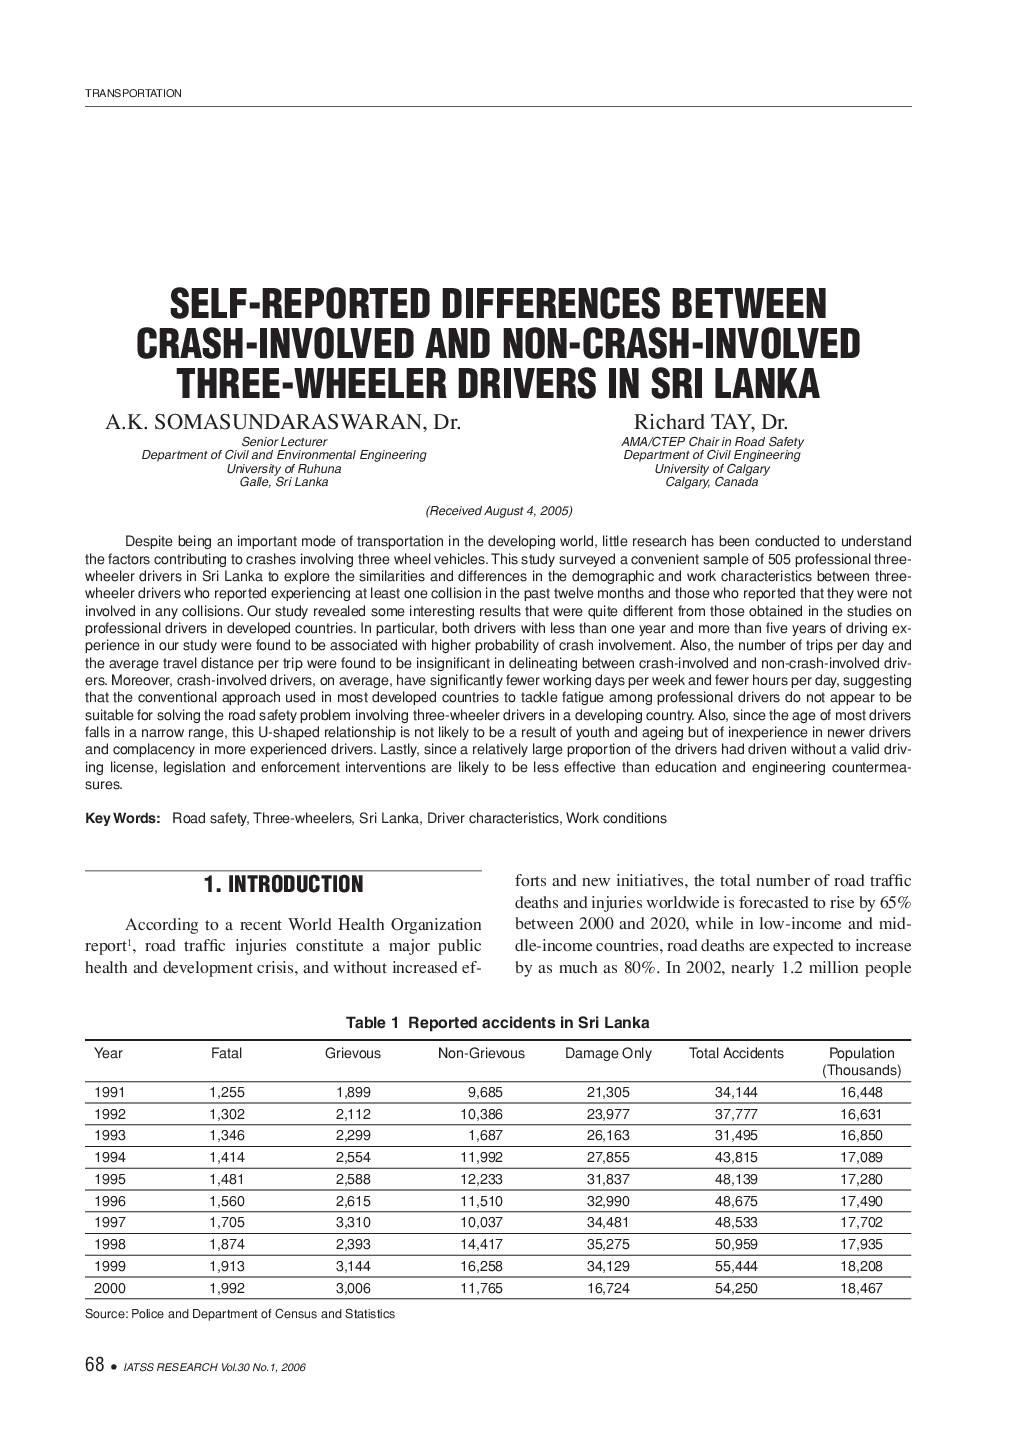 SELF-REPORTED DIFFERENCES BETWEEN CRASH-INVOLVED AND NON-CRASH-INVOLVED THREE-WHEELER DRIVERS IN SRI LANKA